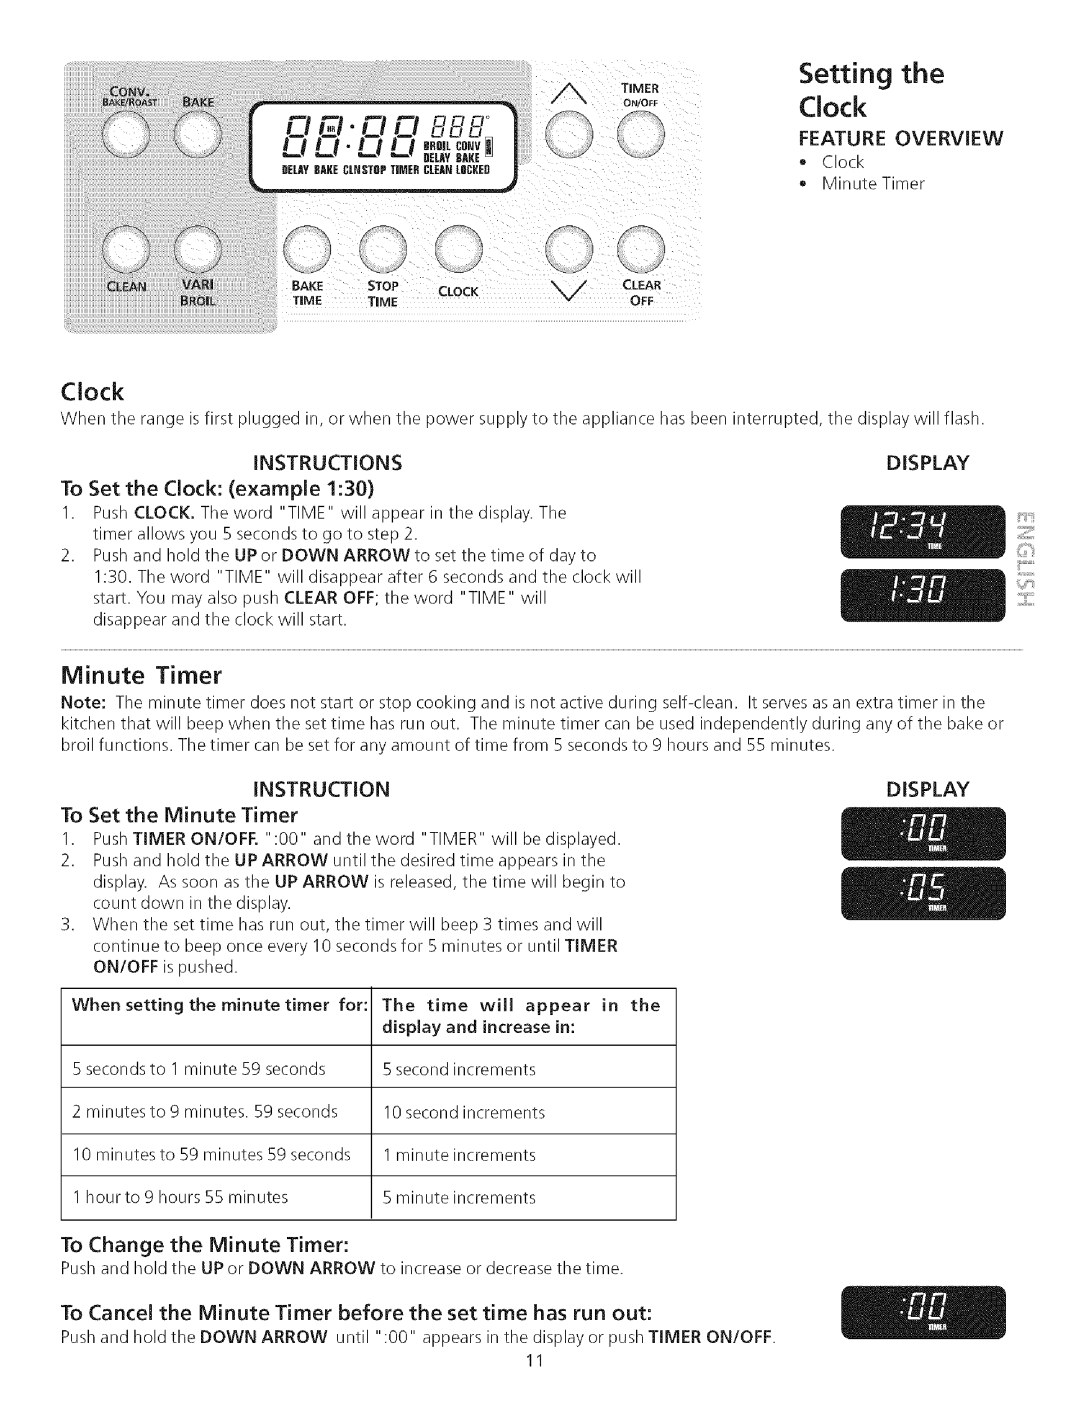 Kenmore 790.75503 manual Clock, Setting the, Feature Overview, Display, Instruction, To Set the Minute Timer, increase in 